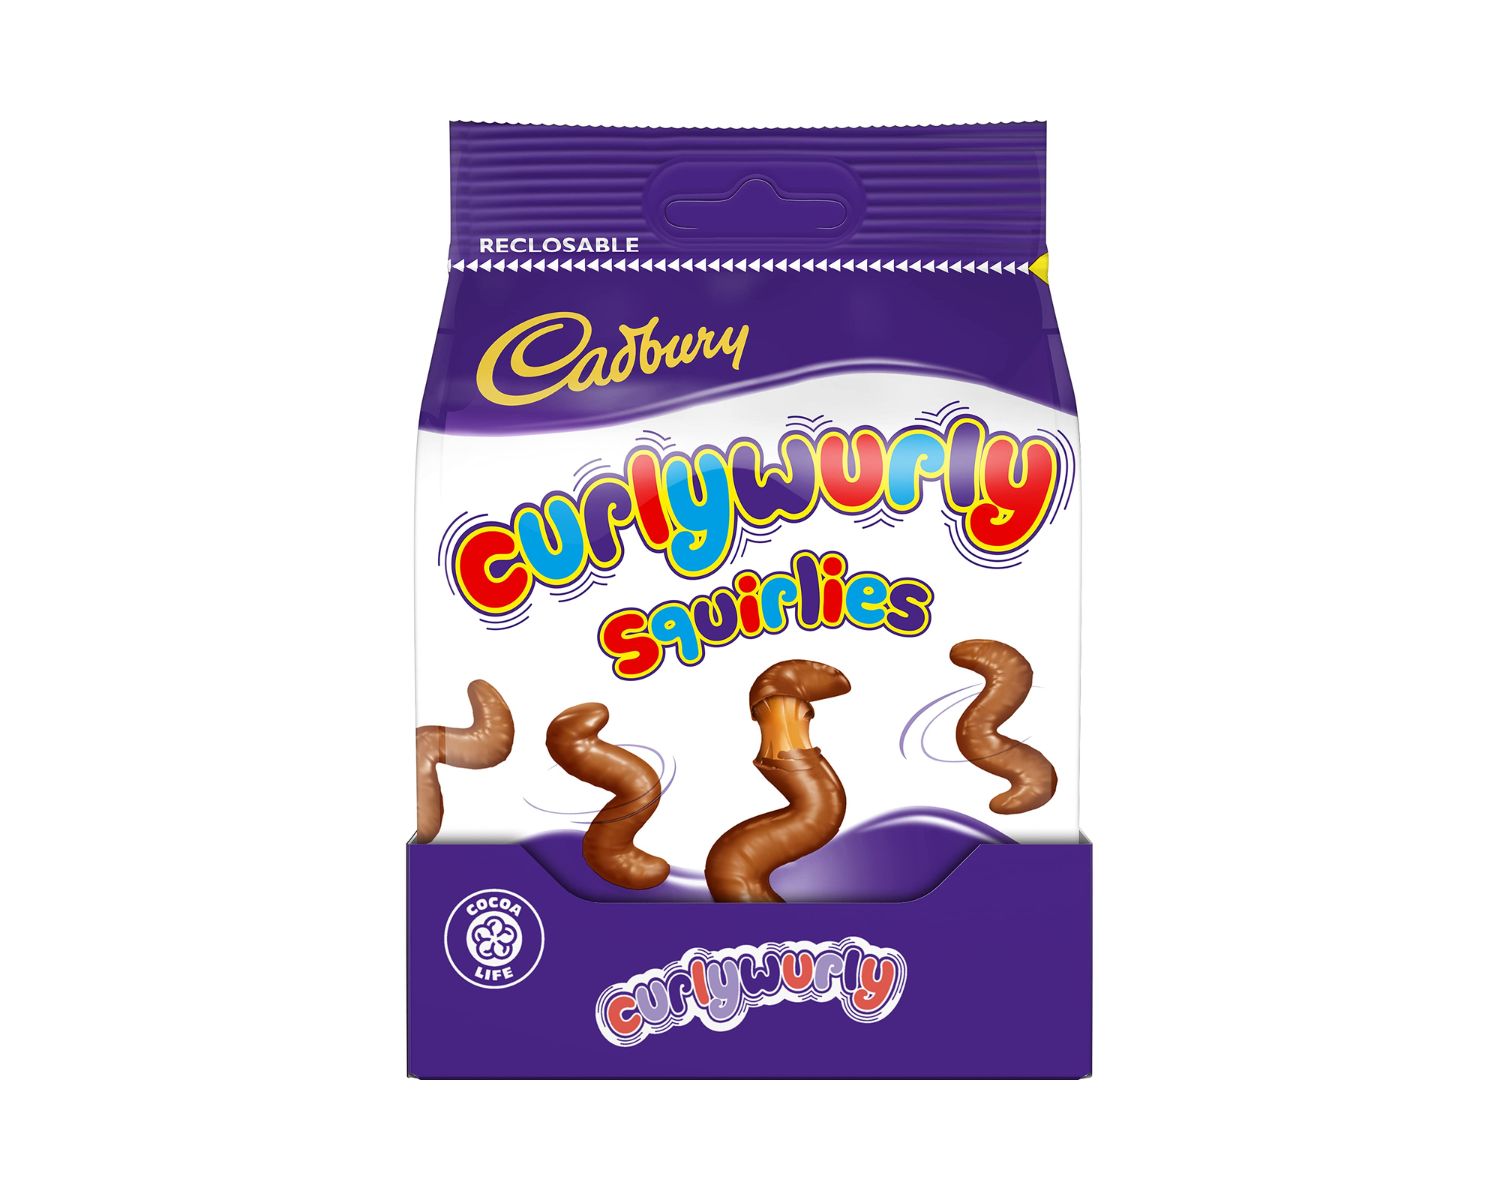 14-fascinating-facts-about-cadbury-curly-wurly